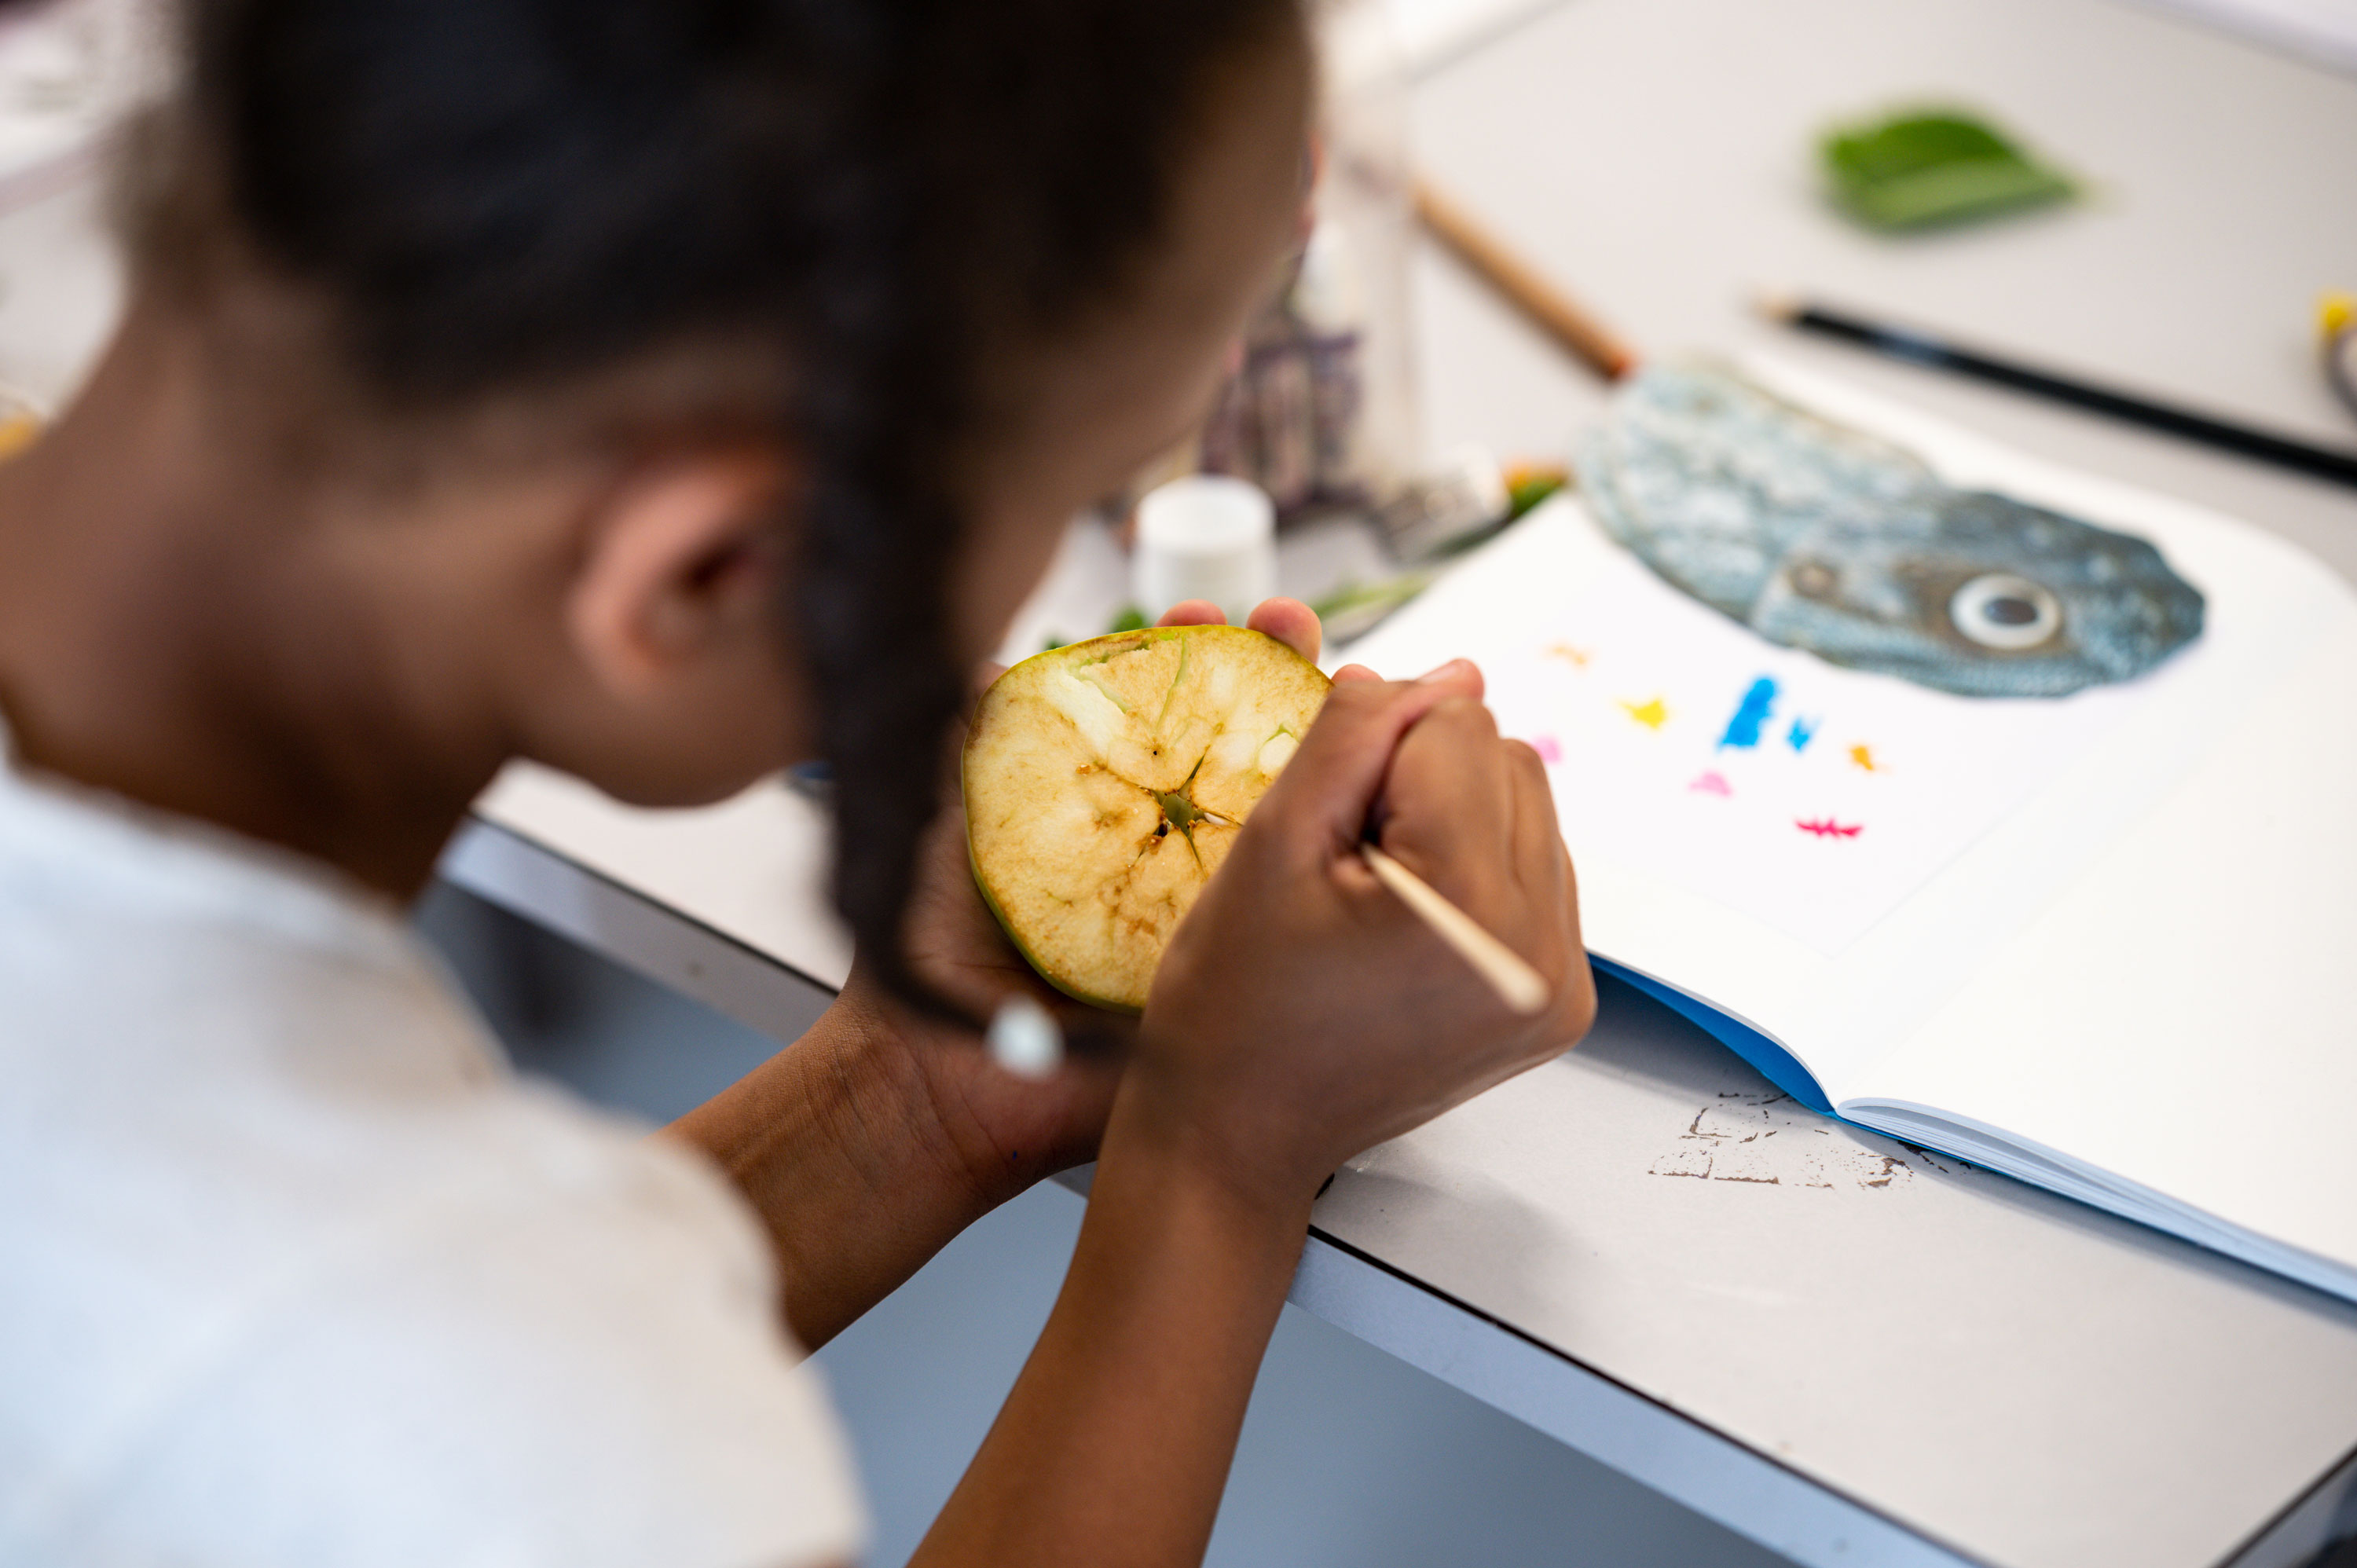 A young person using a cutting knife to create a pattern in a fruit